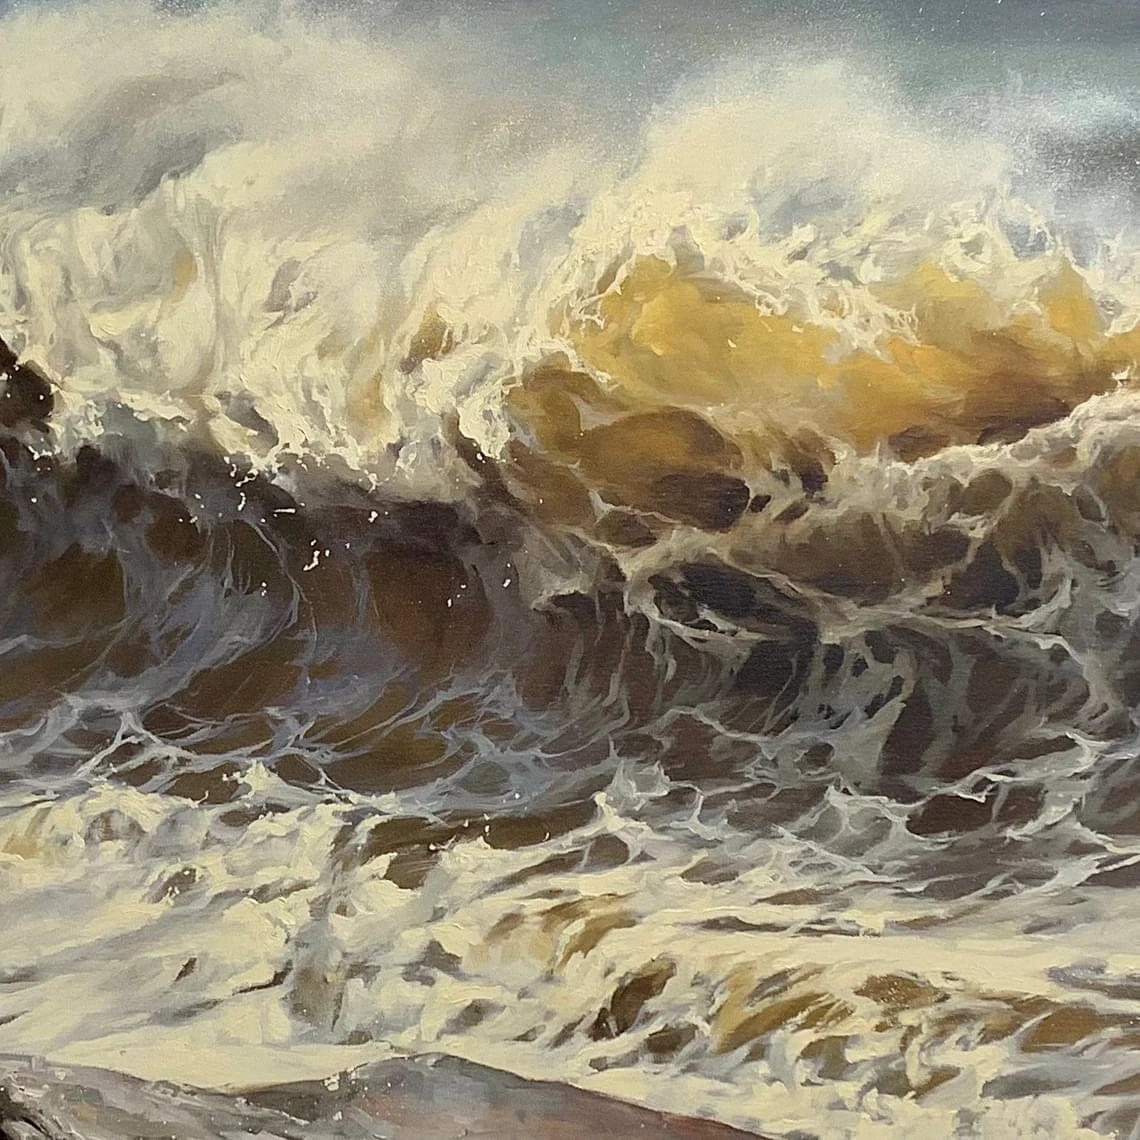 "The Emperor" - Seascapes - Original Painting